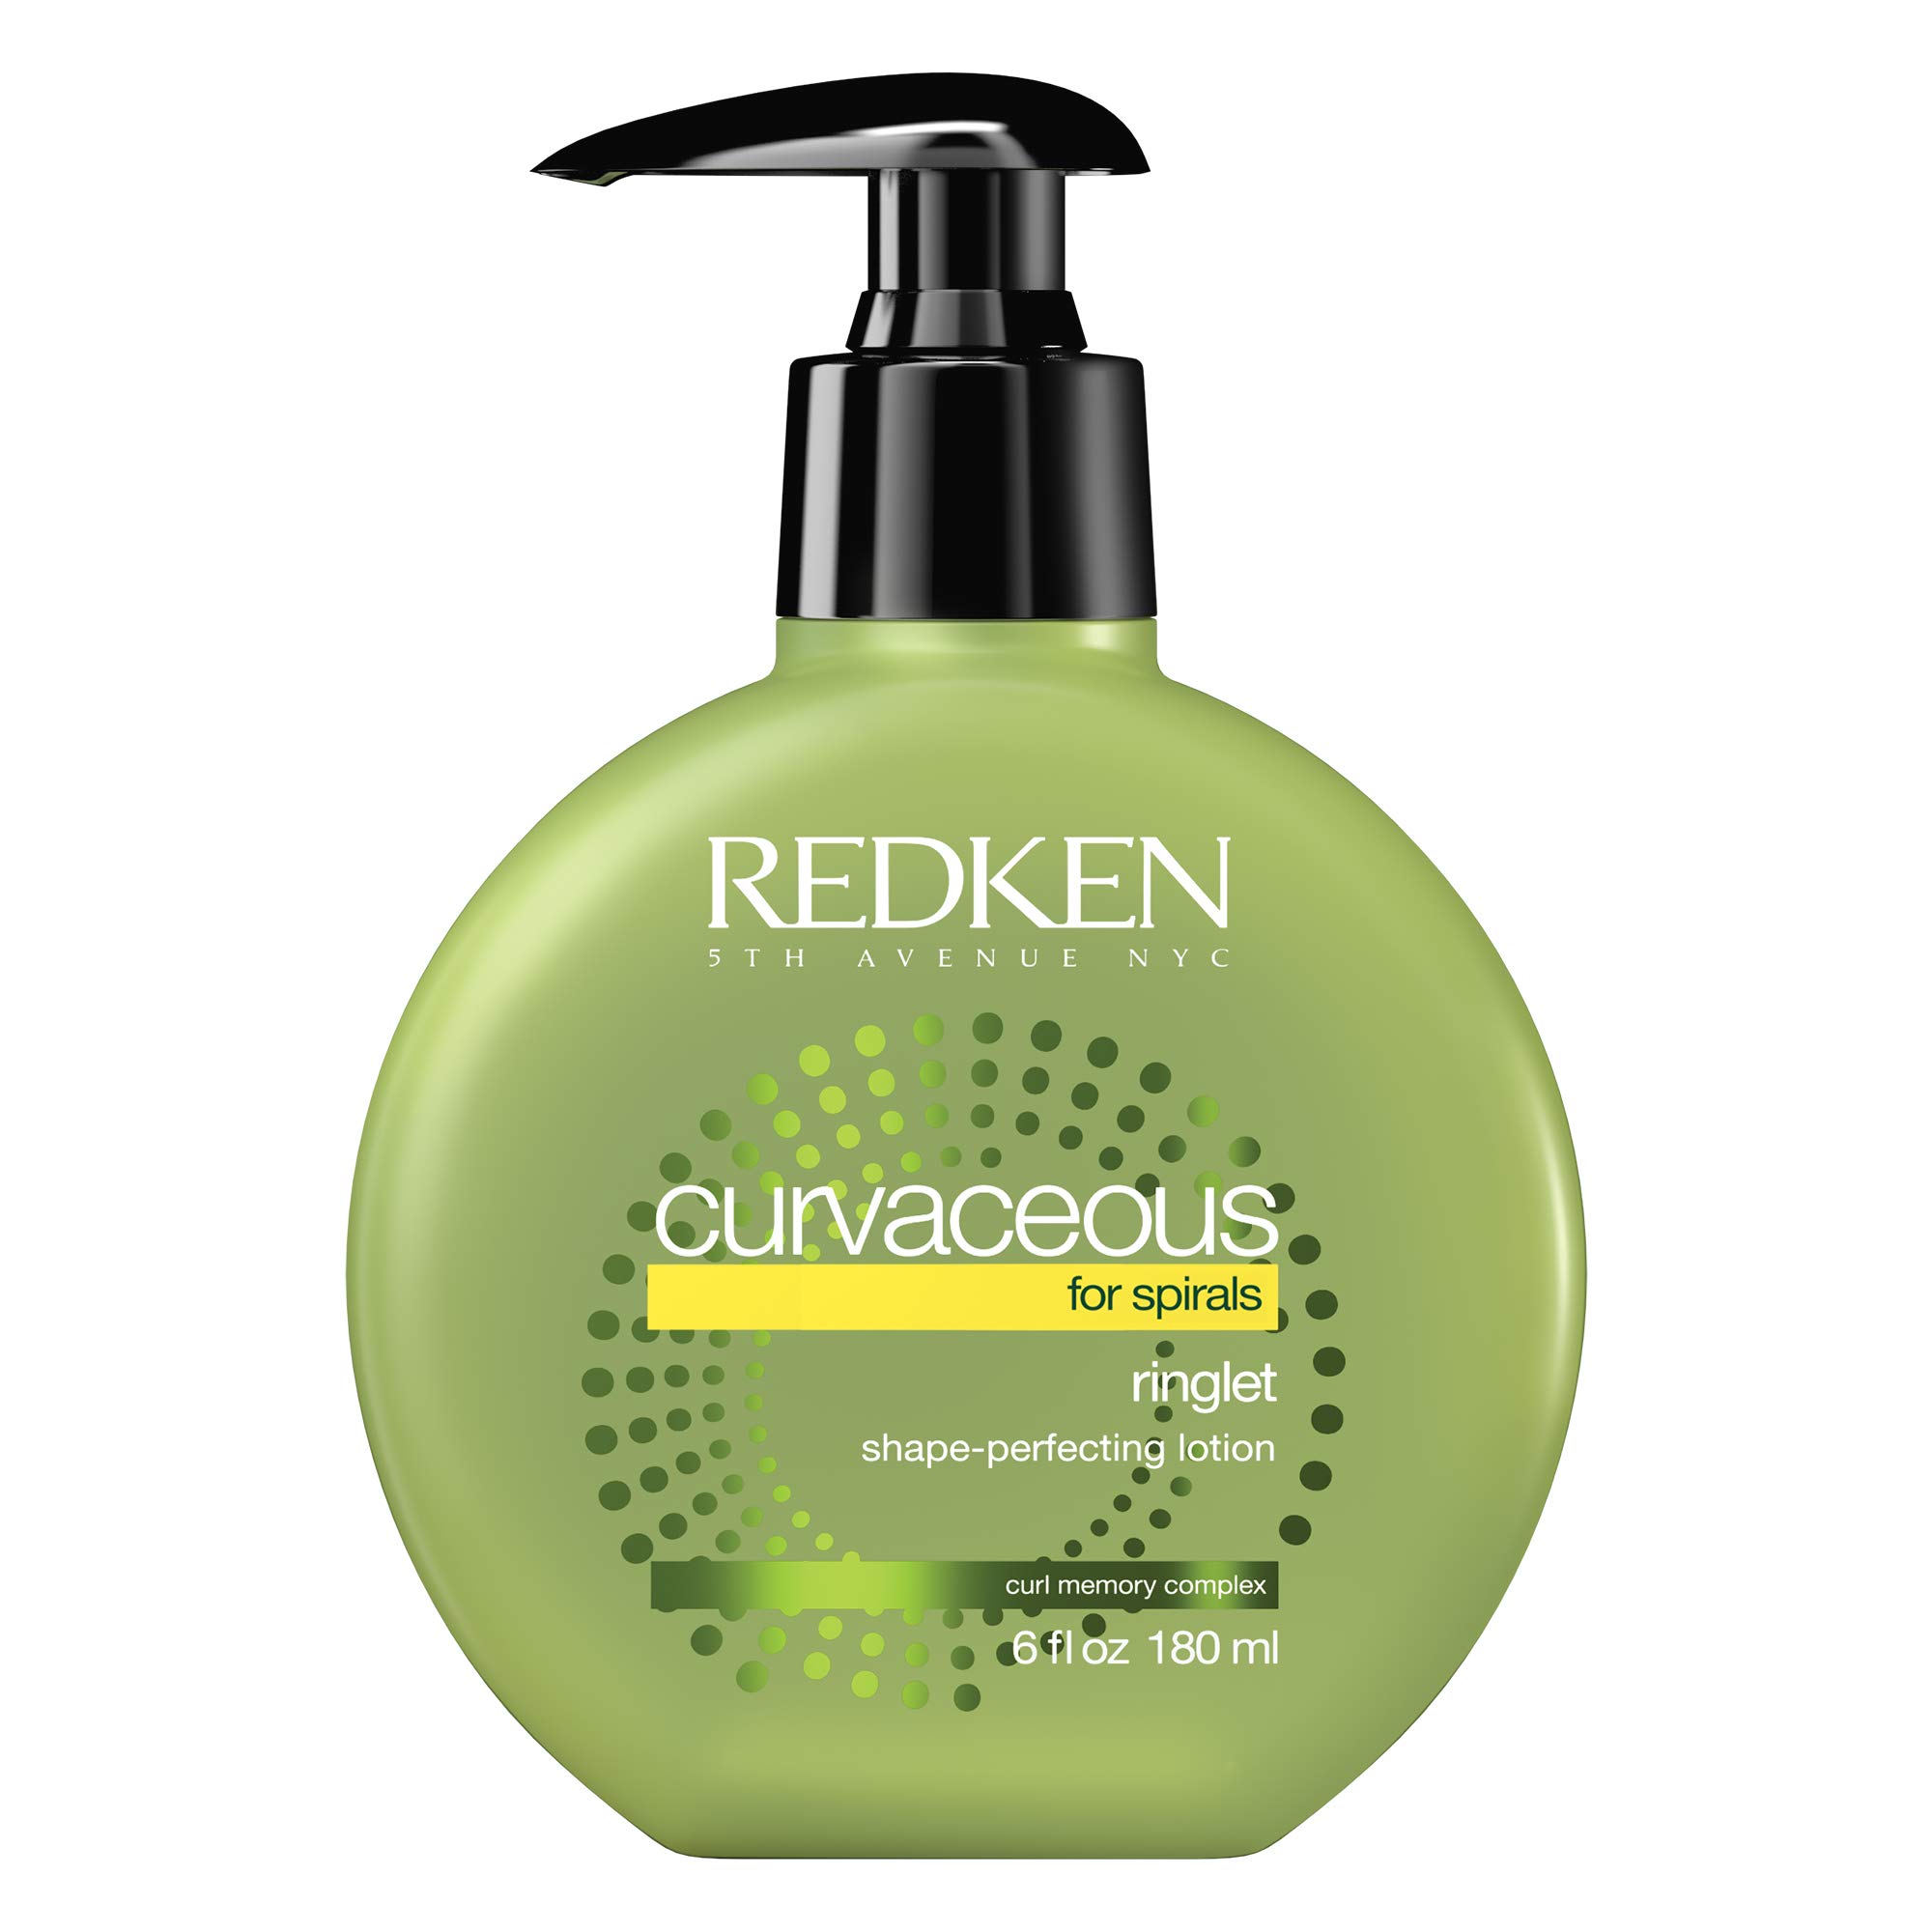 REDKEN Curvaceous Ringlet Shape Perfecting Lotion 6 Fl